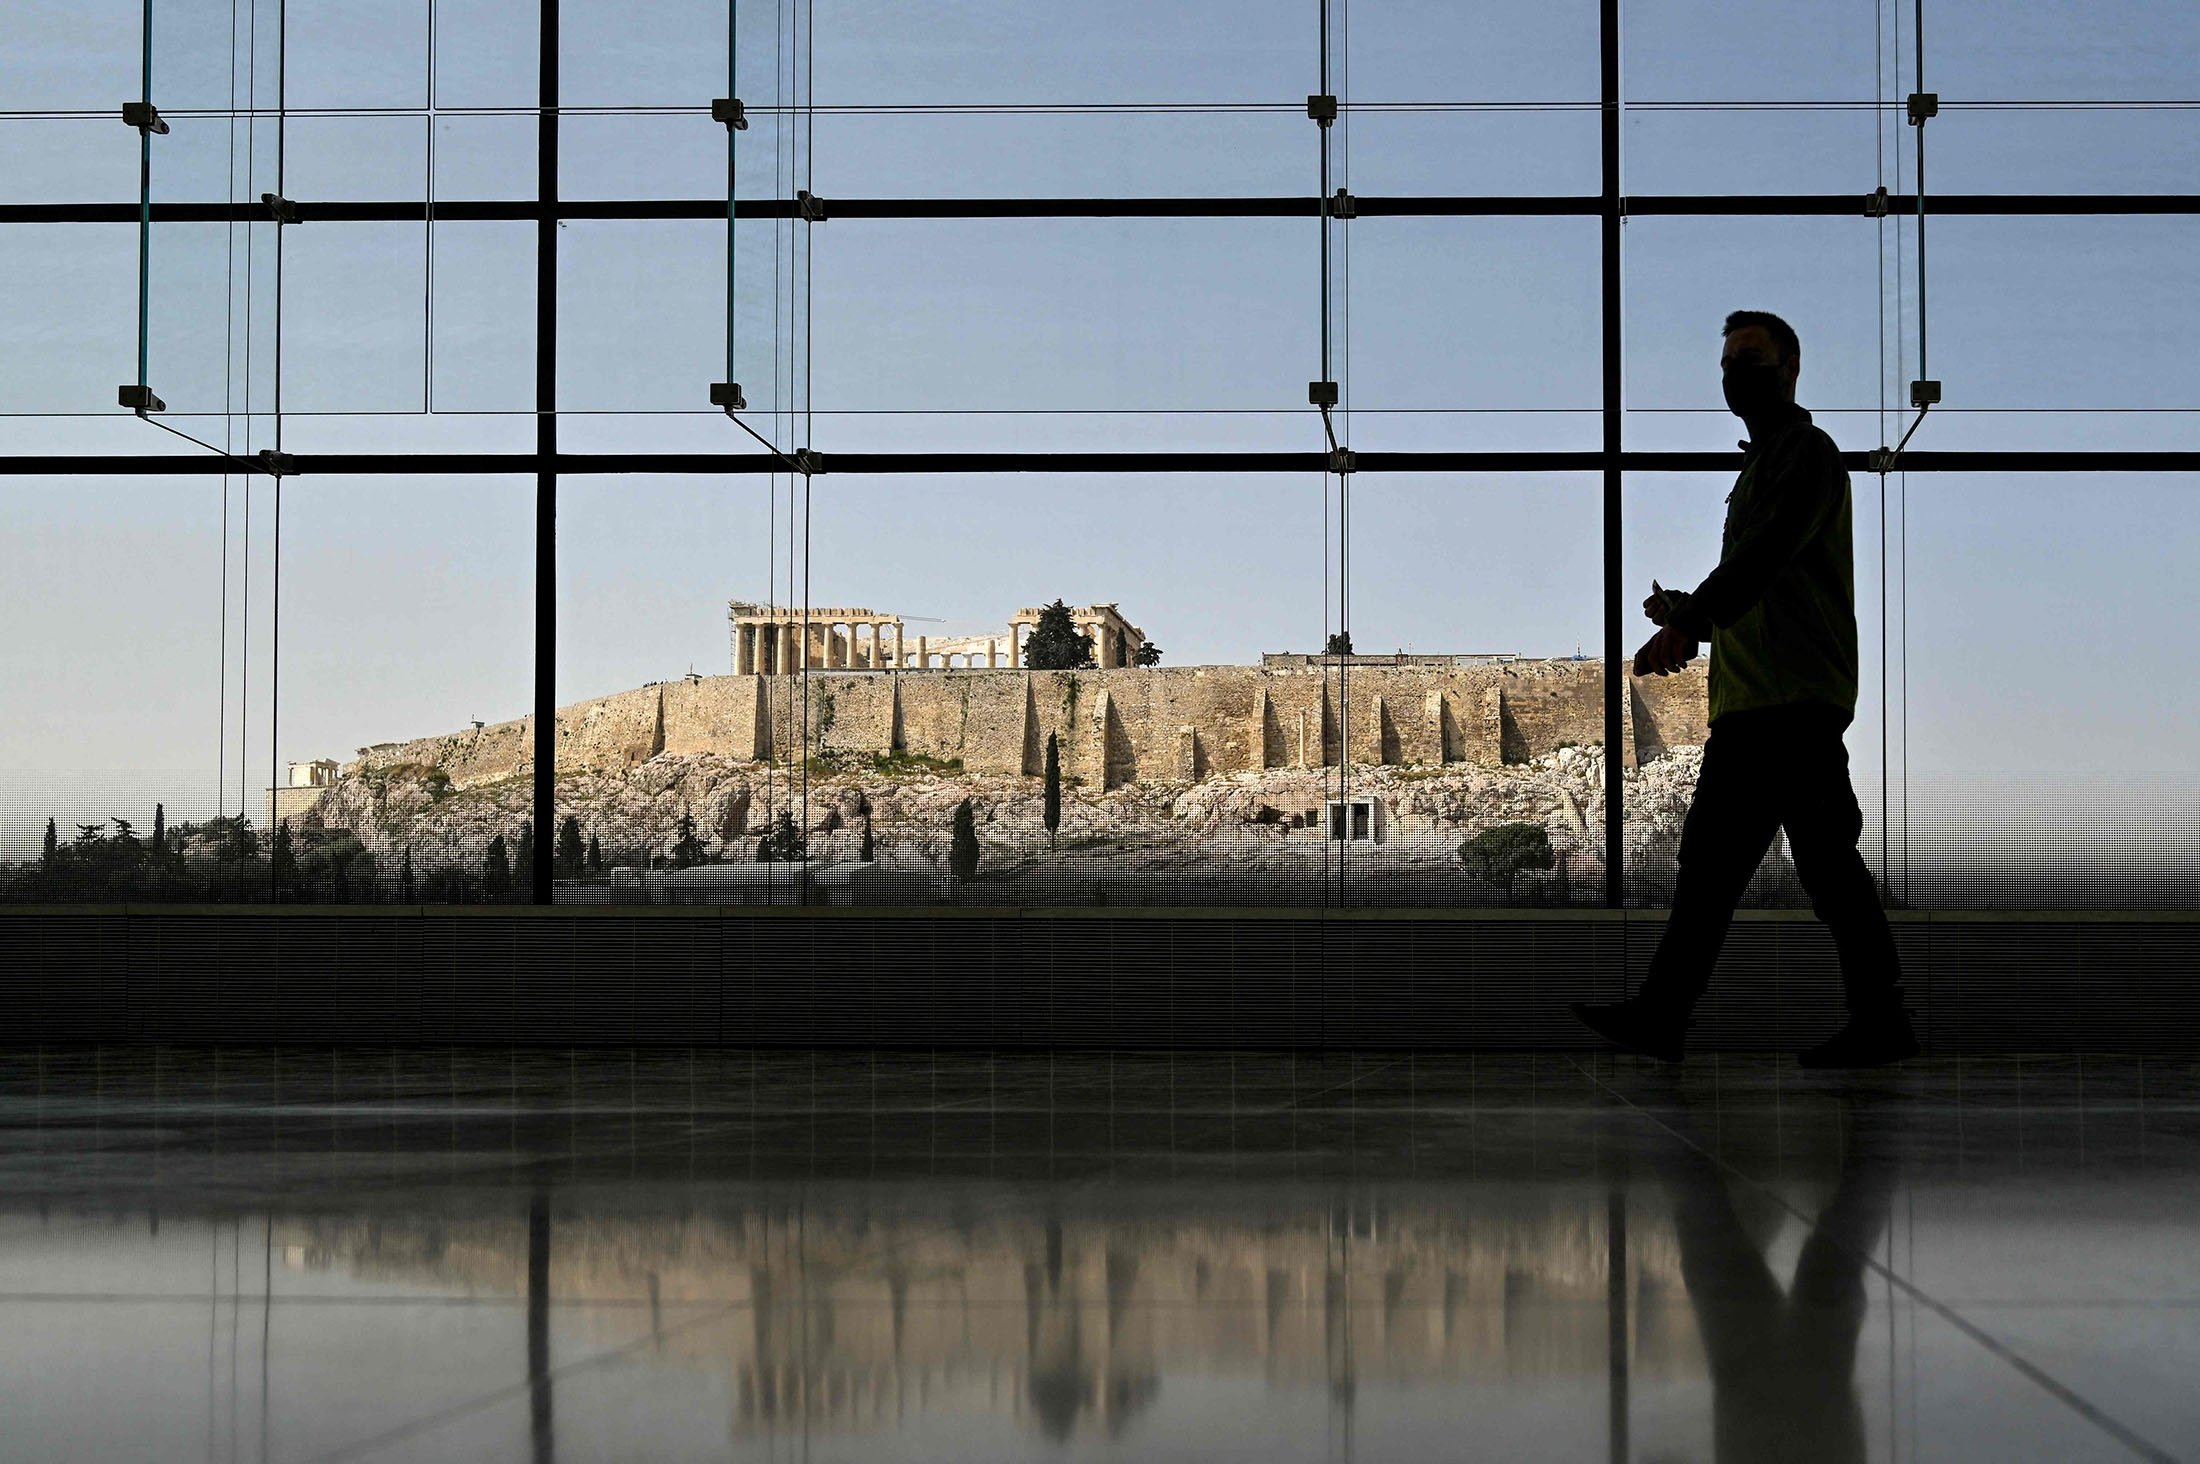 A visitor walks in the "Parthenon room" of the Acropolis museum in Athens, Greece, April 6, 2022. (AFP Photo)